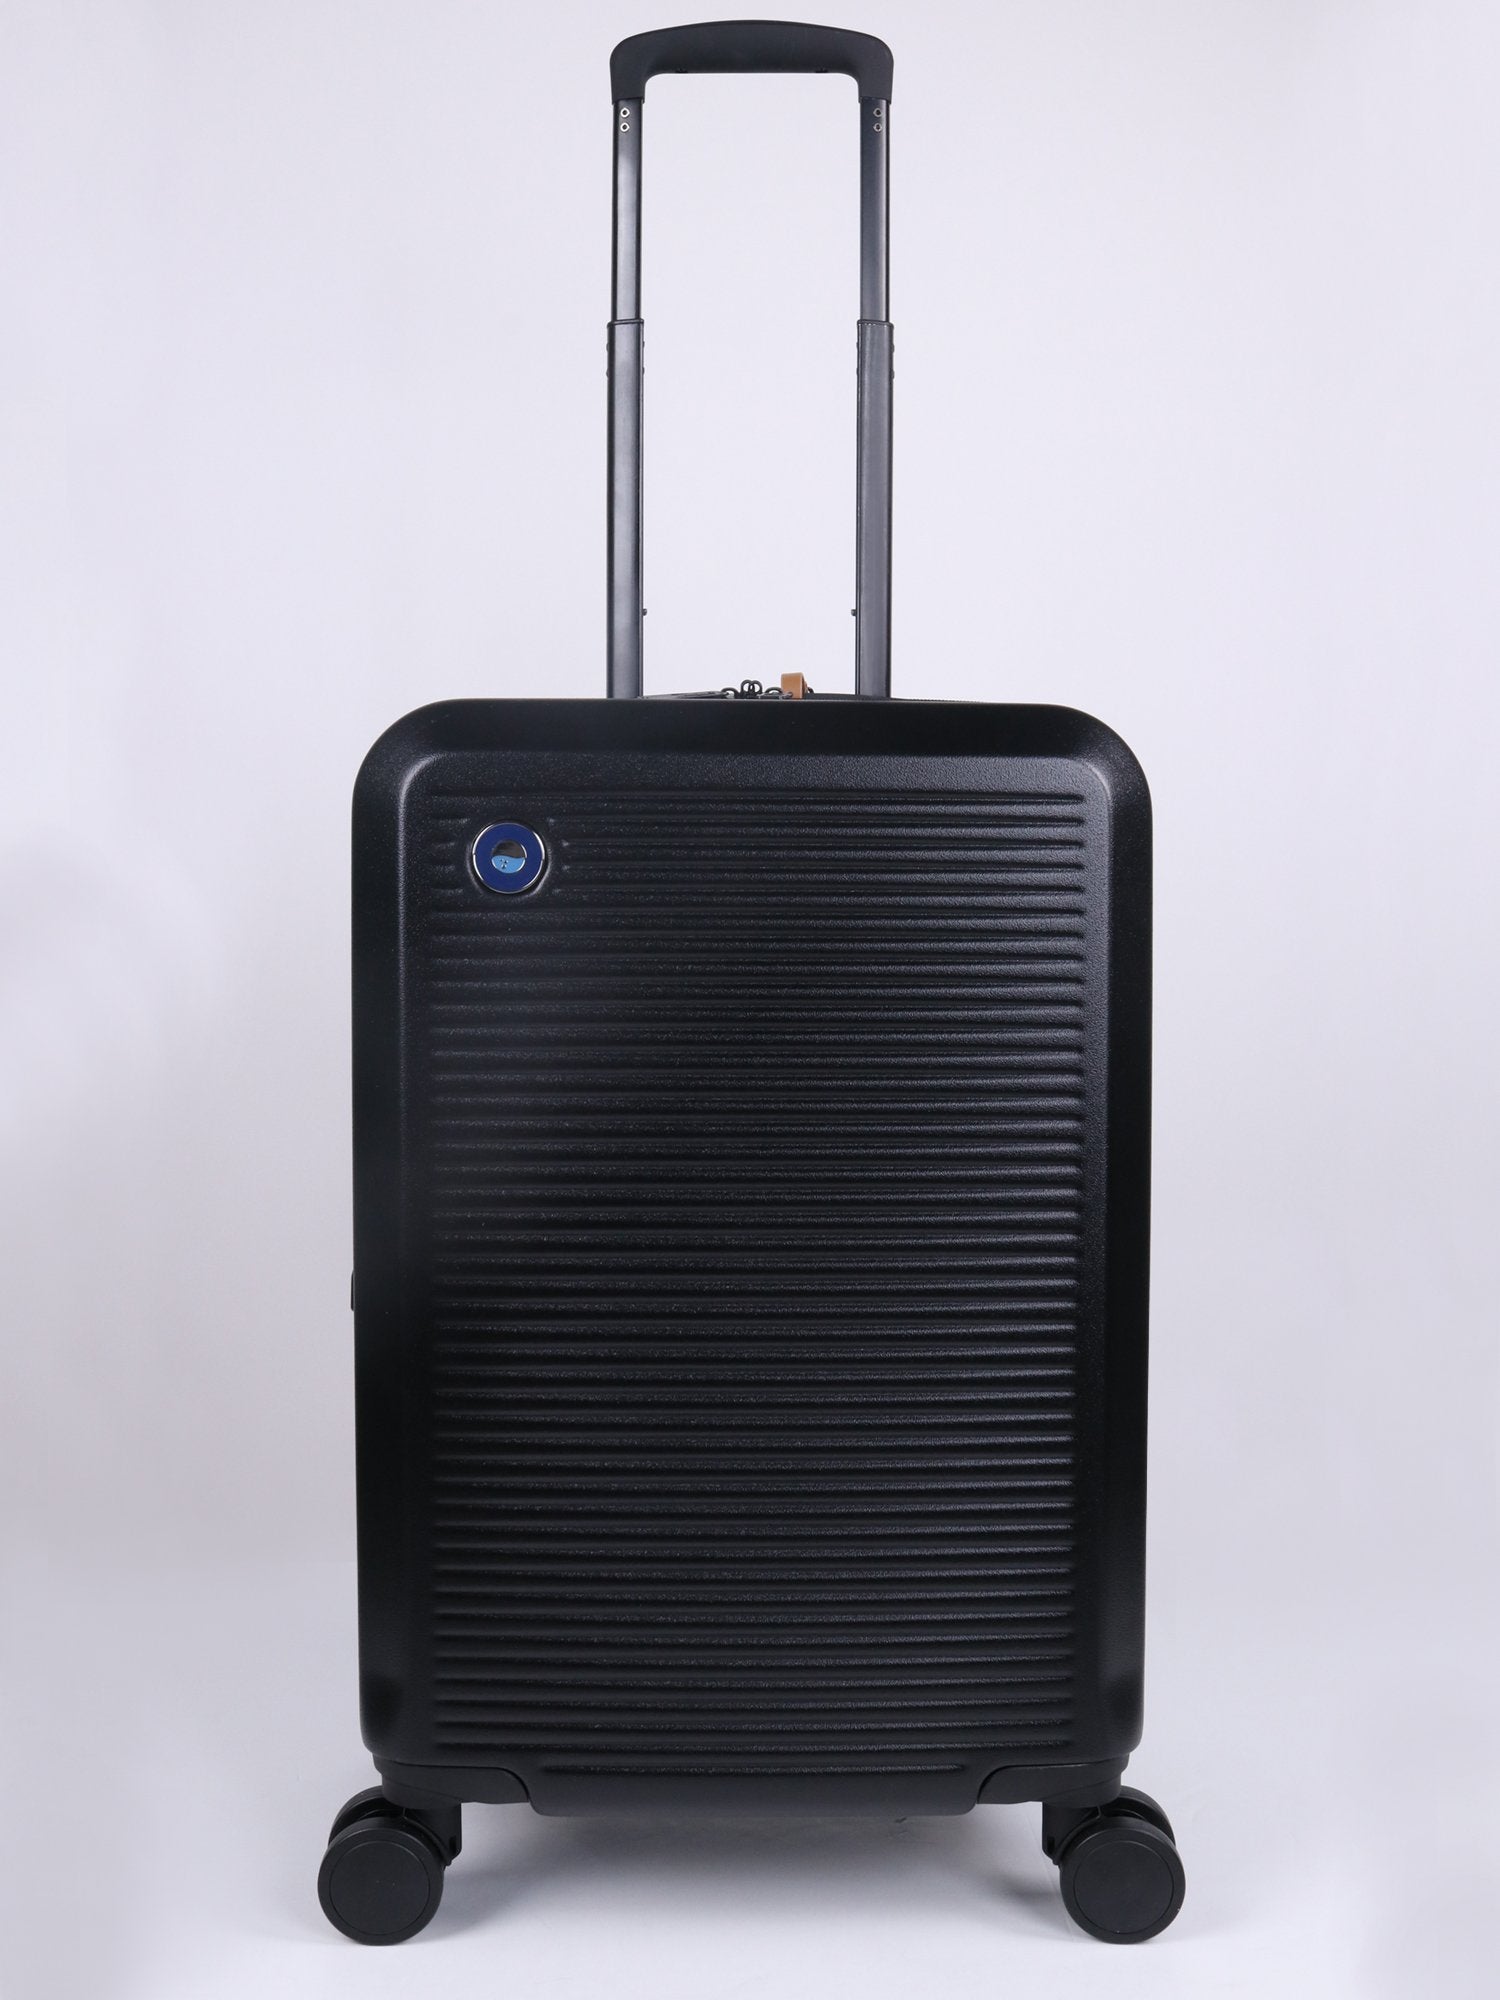 ECOTECH SPINNER 20" CARRY ON LUGGAGE, BLACK